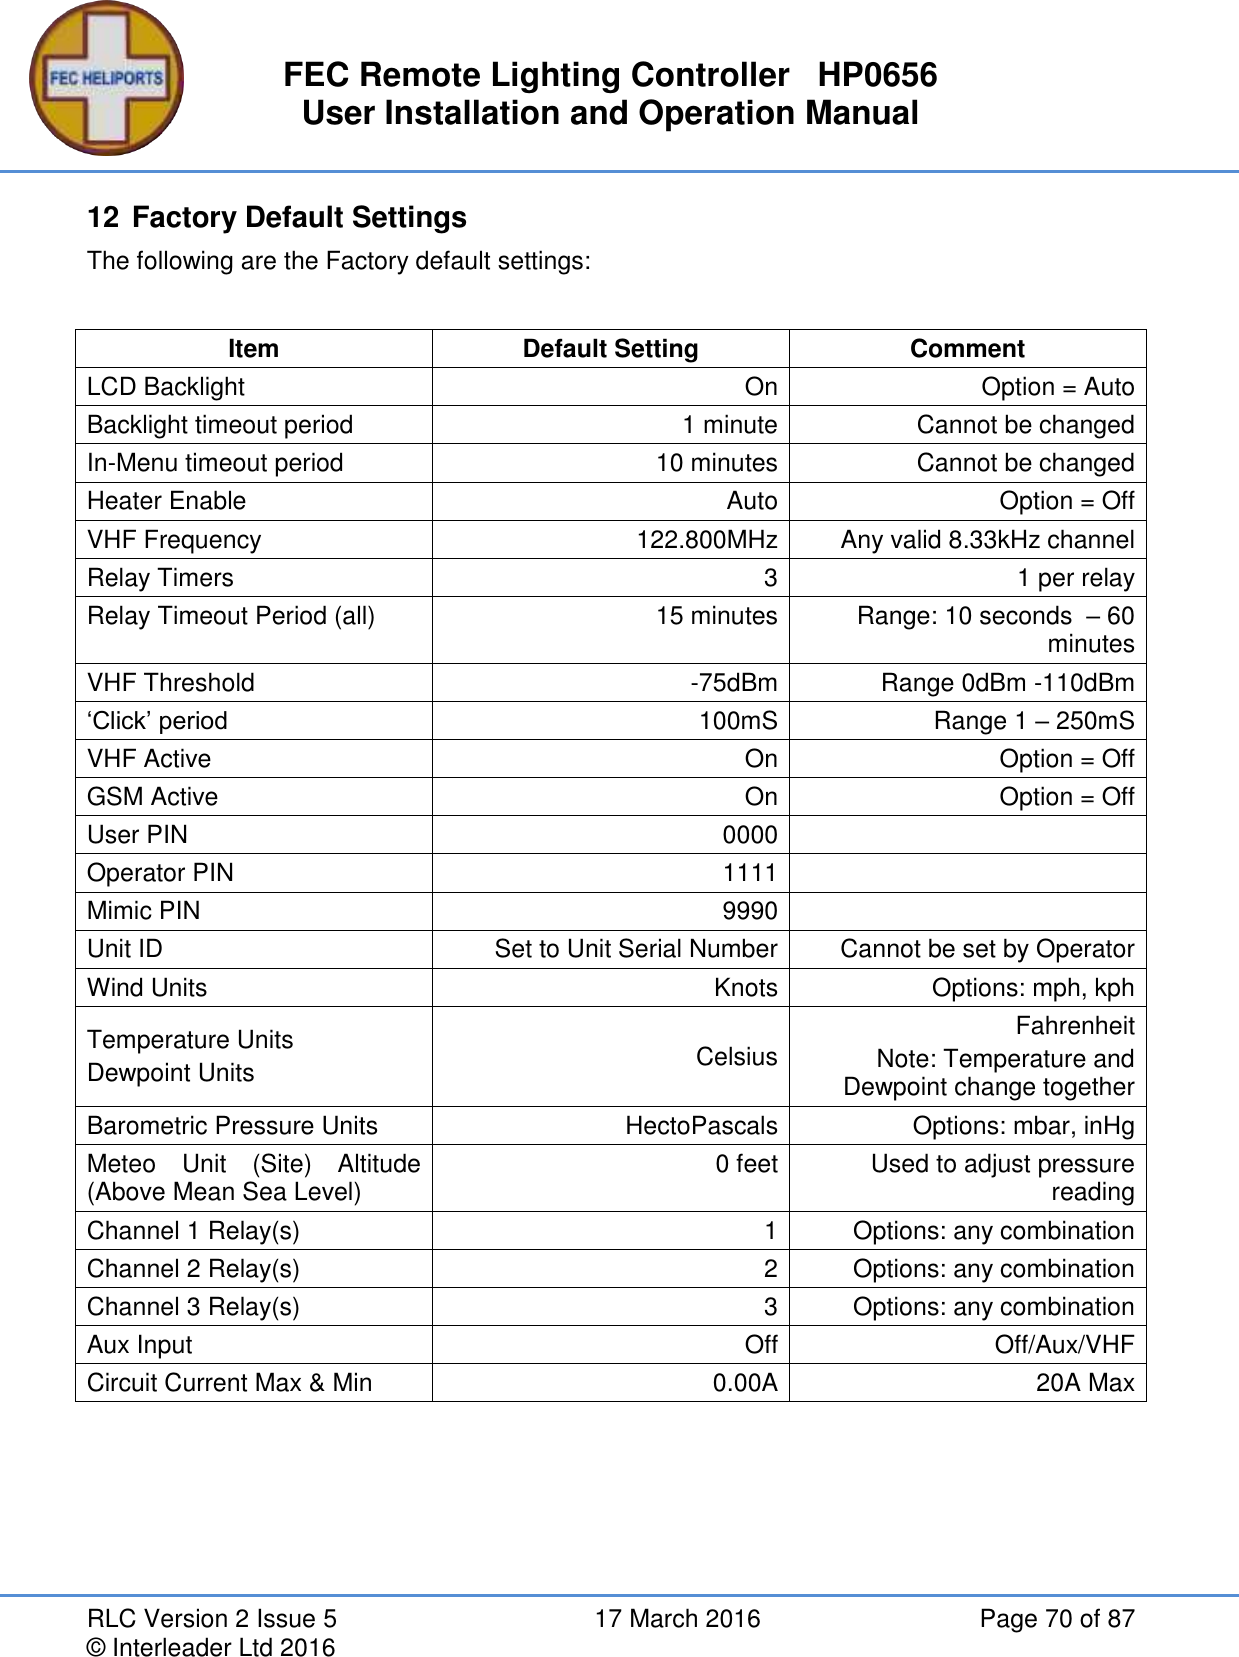 FEC Remote Lighting Controller   HP0656 User Installation and Operation Manual RLC Version 2 Issue 5  17 March 2016  Page 70 of 87 © Interleader Ltd 2016 12 Factory Default Settings The following are the Factory default settings:  Item Default Setting Comment LCD Backlight On Option = Auto Backlight timeout period 1 minute Cannot be changed In-Menu timeout period 10 minutes Cannot be changed Heater Enable Auto Option = Off VHF Frequency 122.800MHz Any valid 8.33kHz channel Relay Timers 3 1 per relay Relay Timeout Period (all) 15 minutes Range: 10 seconds  – 60 minutes VHF Threshold -75dBm Range 0dBm -110dBm ‘Click’ period 100mS Range 1 – 250mS VHF Active On Option = Off GSM Active On Option = Off User PIN 0000  Operator PIN 1111  Mimic PIN 9990  Unit ID Set to Unit Serial Number  Cannot be set by Operator Wind Units Knots Options: mph, kph Temperature Units Dewpoint Units Celsius Fahrenheit Note: Temperature and Dewpoint change together Barometric Pressure Units HectoPascals Options: mbar, inHg  Meteo  Unit  (Site)  Altitude (Above Mean Sea Level) 0 feet Used to adjust pressure reading Channel 1 Relay(s) 1 Options: any combination Channel 2 Relay(s) 2 Options: any combination Channel 3 Relay(s) 3 Options: any combination Aux Input Off Off/Aux/VHF Circuit Current Max &amp; Min 0.00A 20A Max    